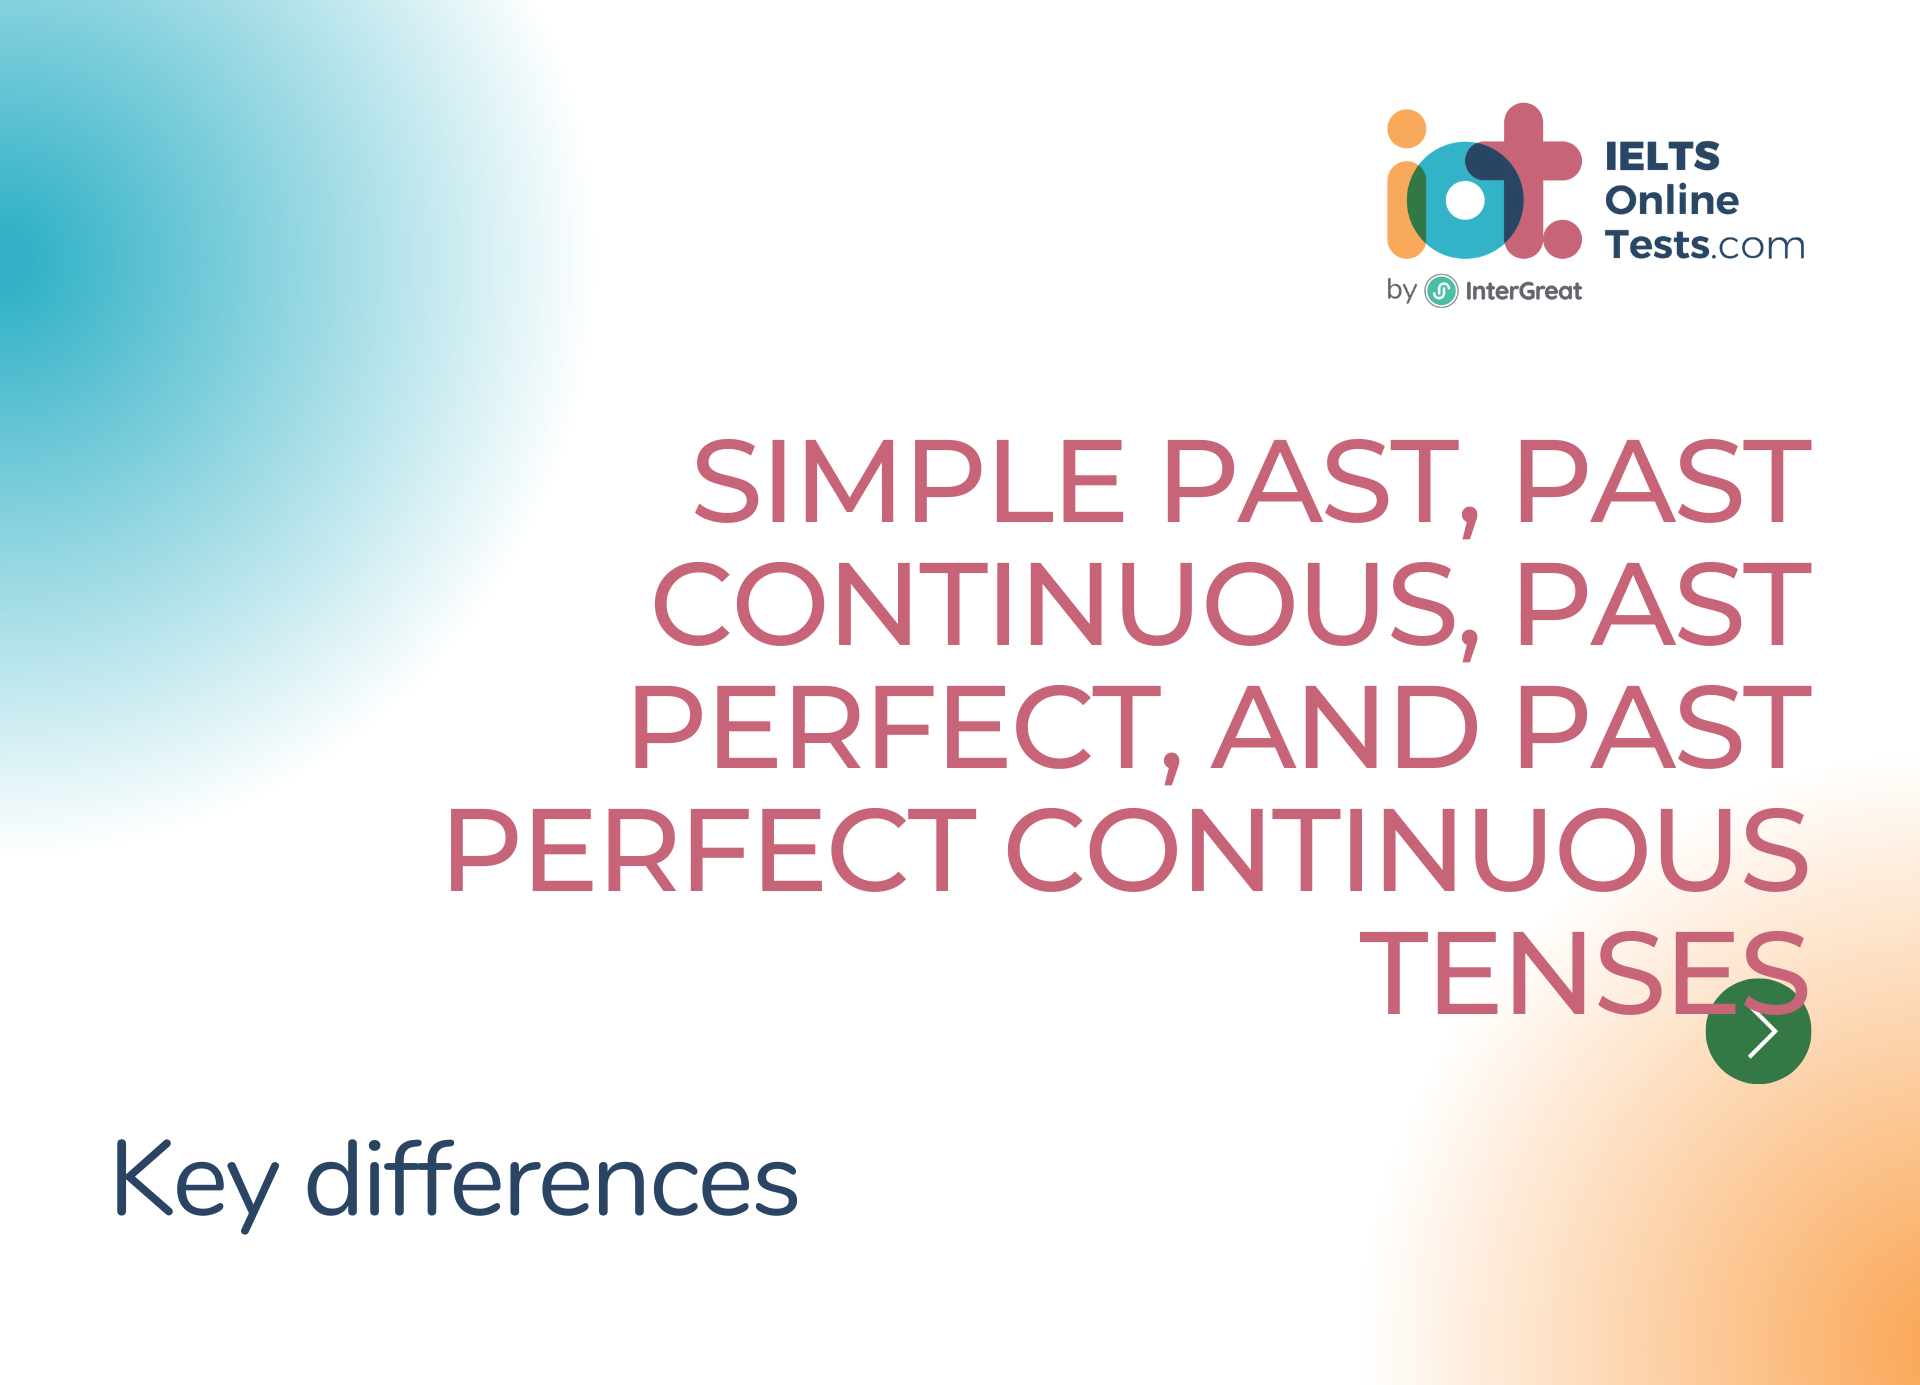 Key differences between the simple past, past continuous, past perfect, and past perfect continuous tenses